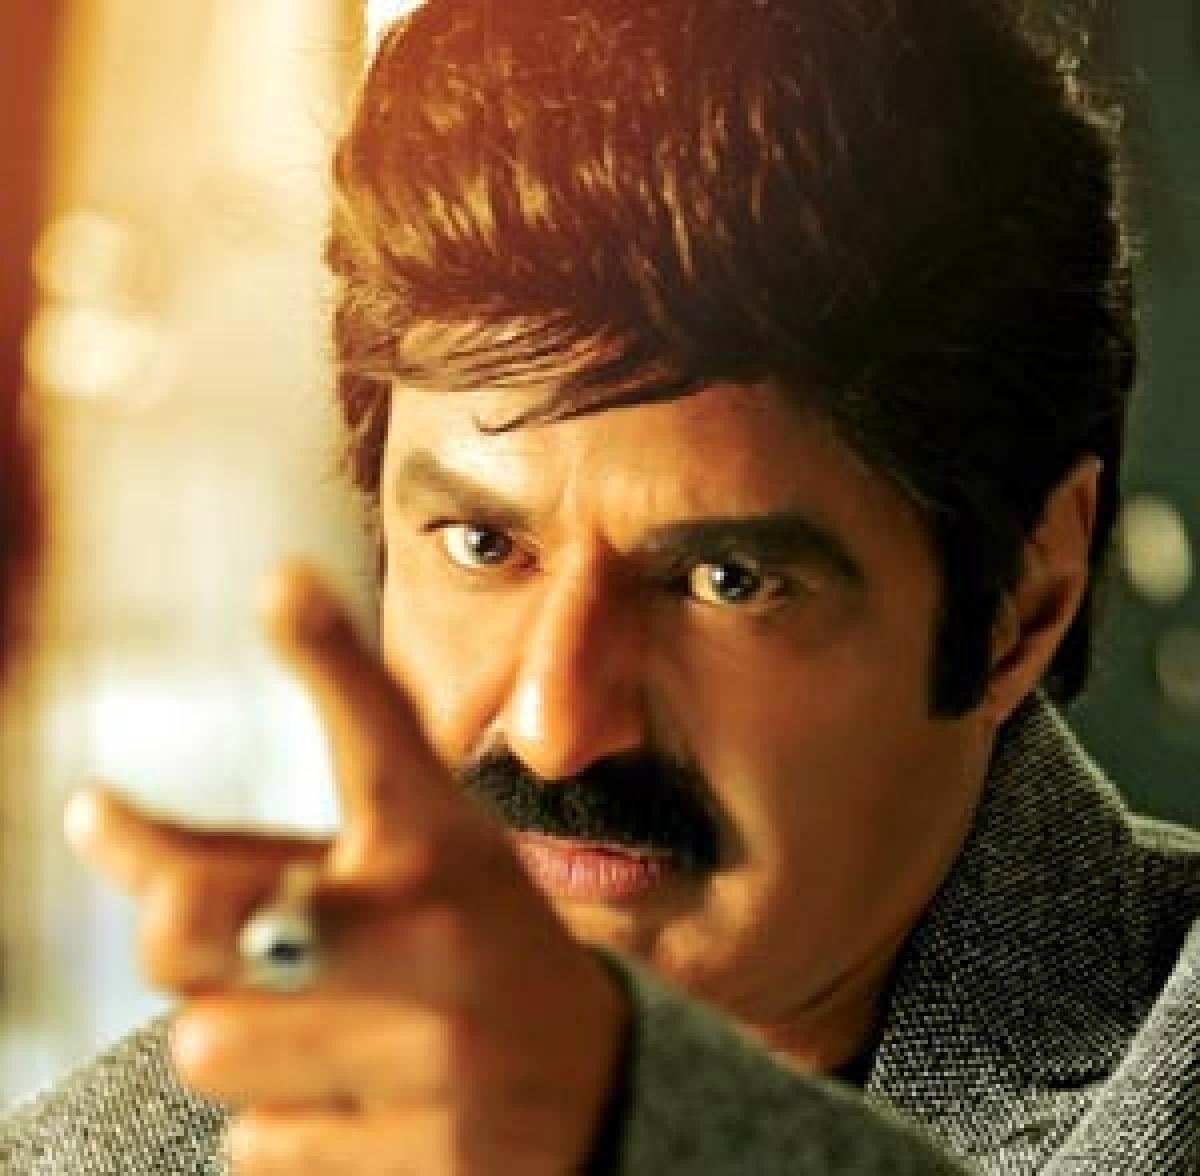 Balayya is a gangster in Puri’s flick